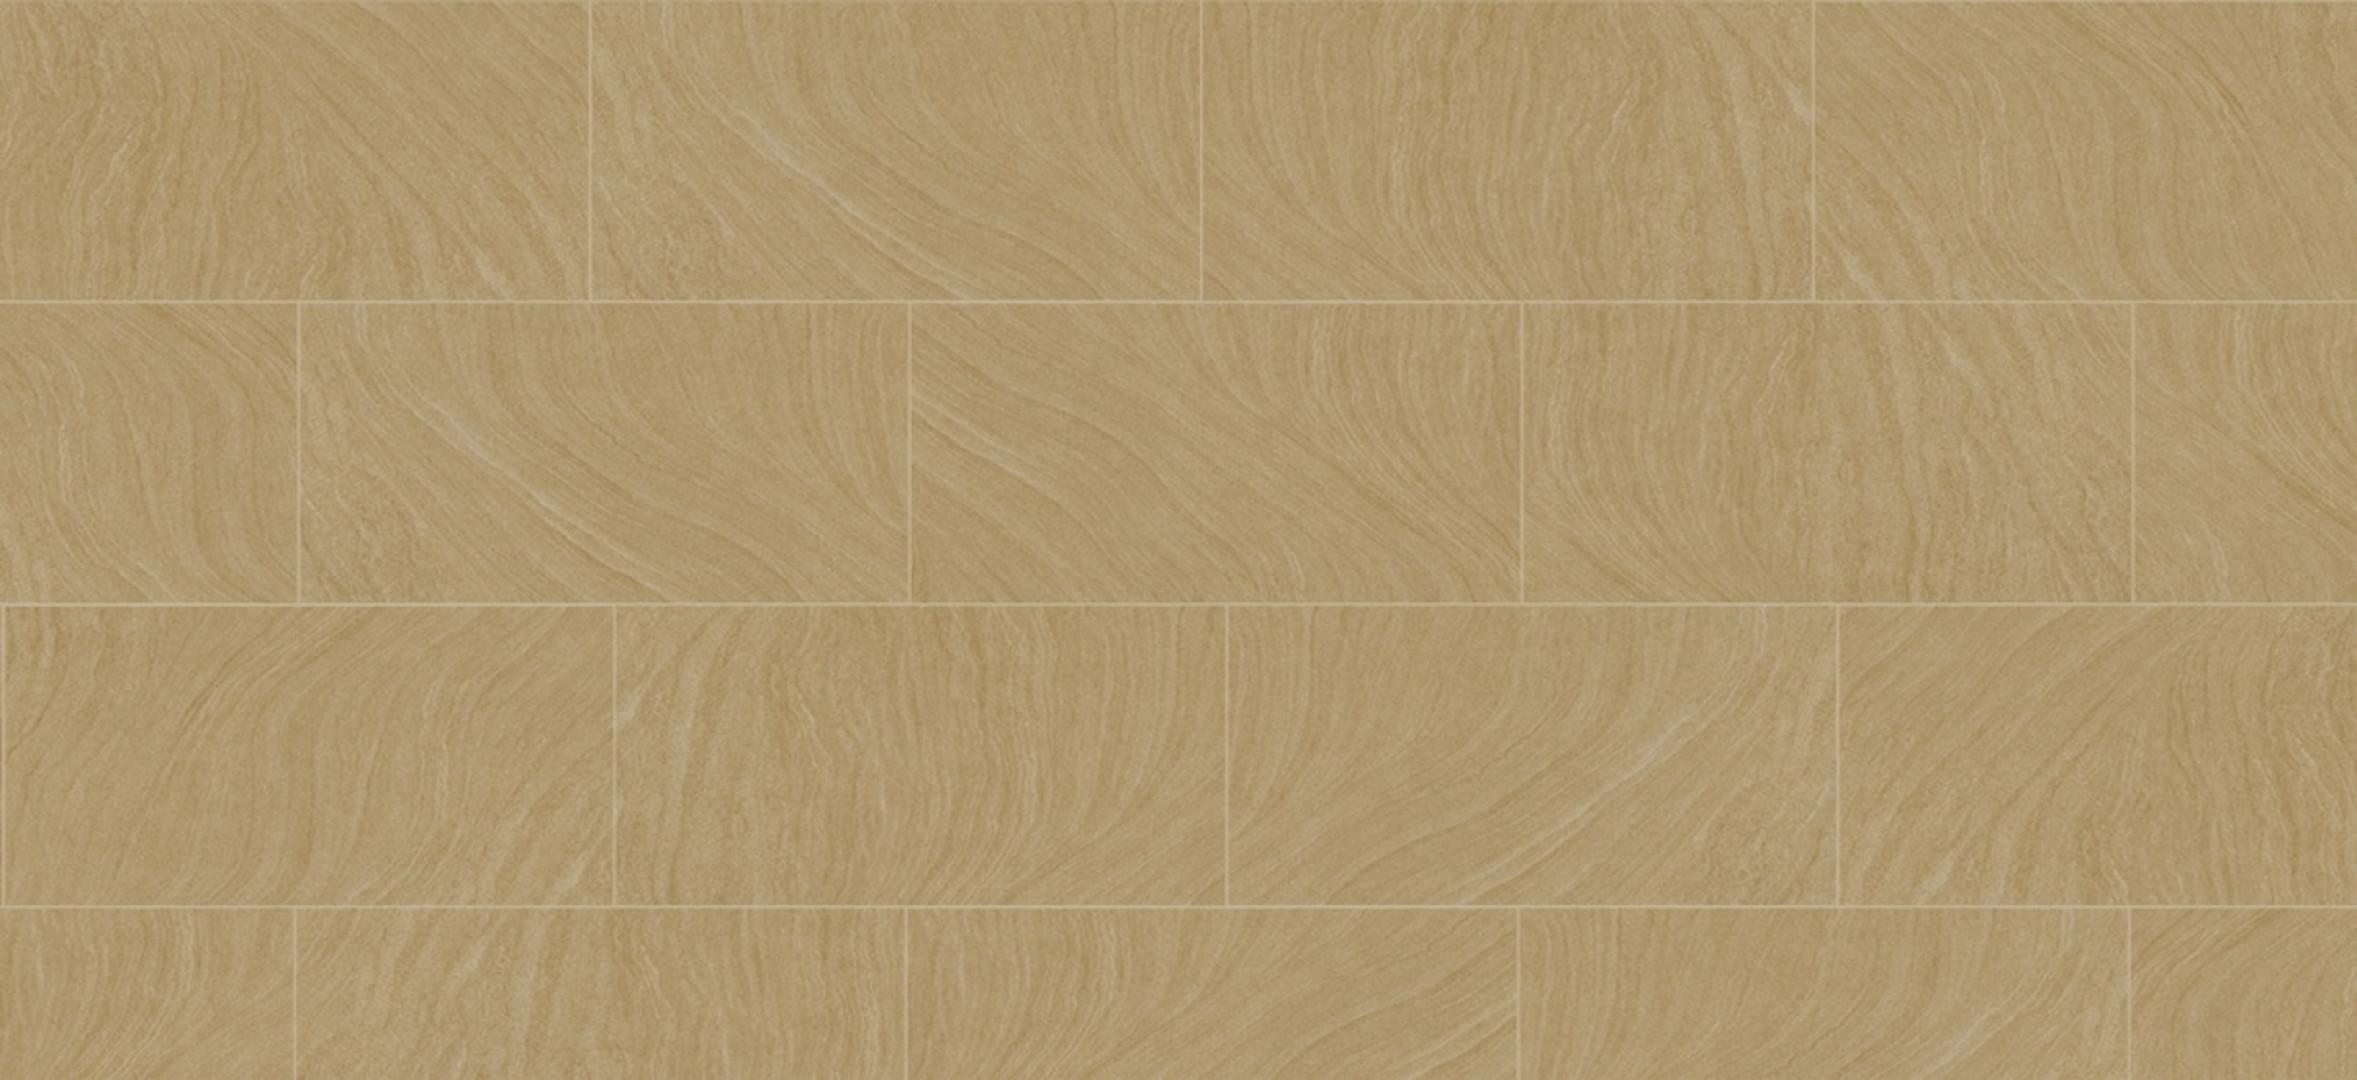 Sand Marble | Warm NOI-1340 from Nox